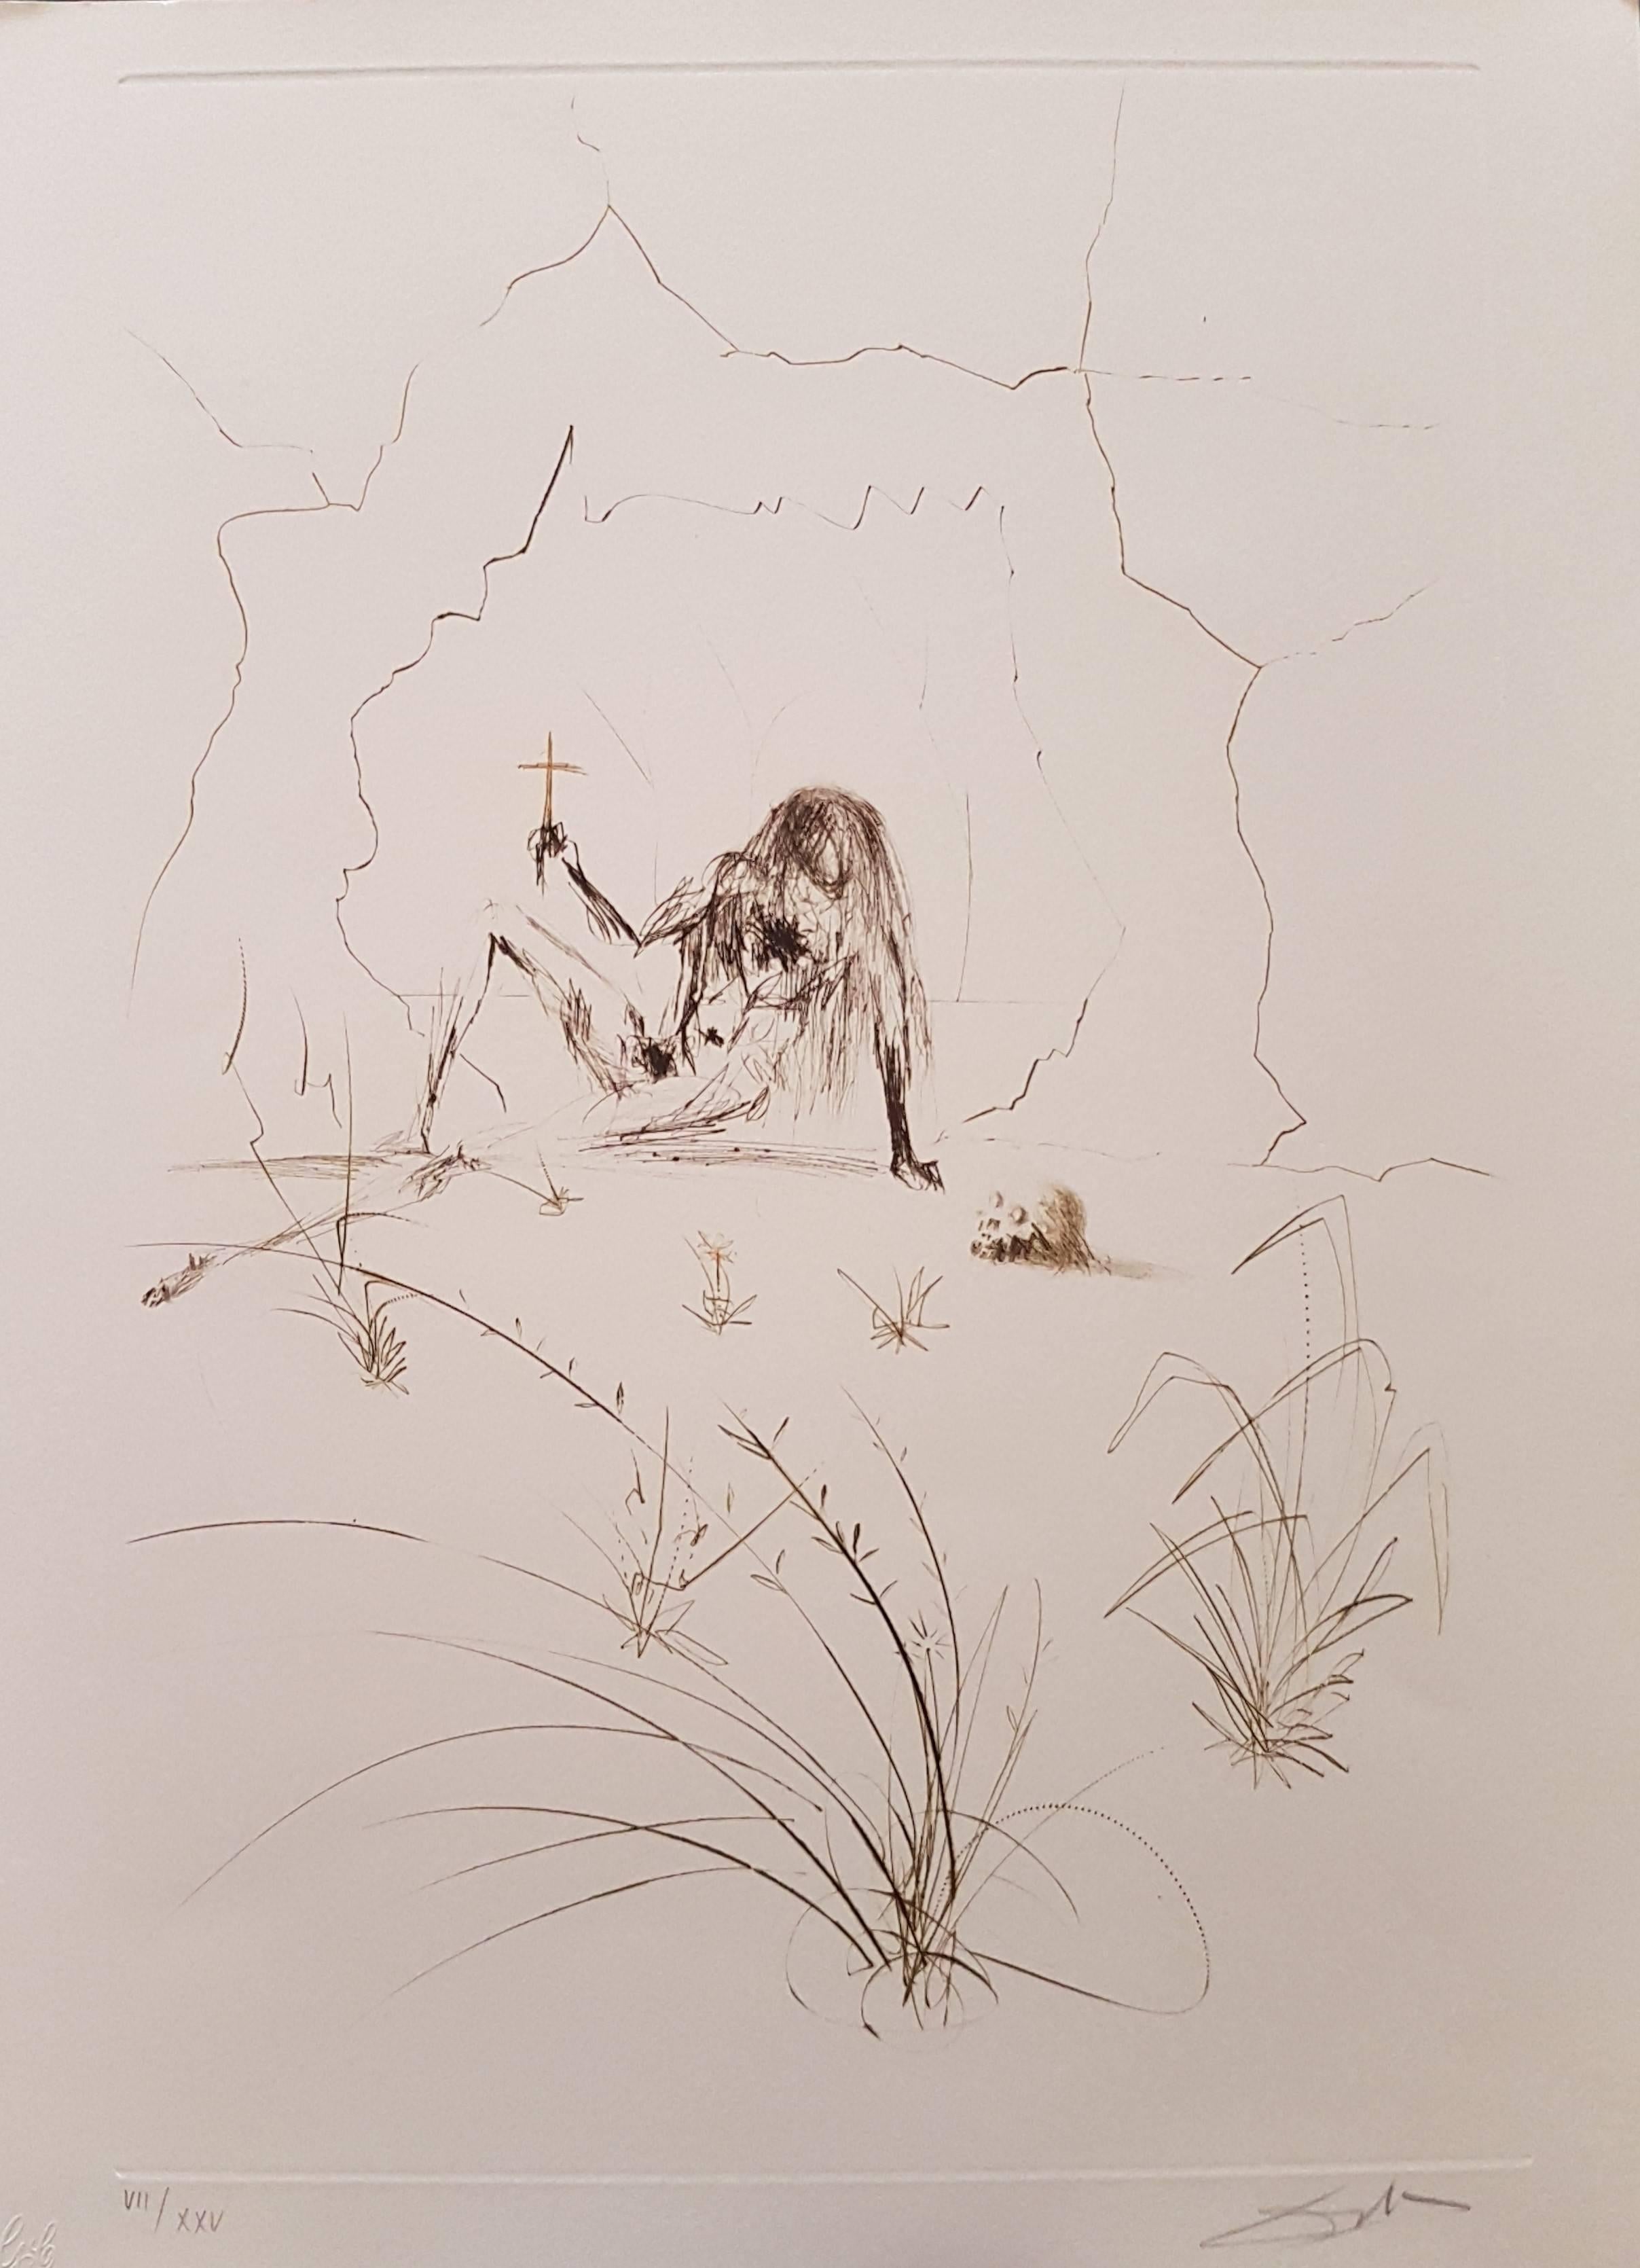 Salvador Dalí Print – Plate from "Tristan and Isolde": Frere Orgin, L'Hermite (Brother Orgin, Hermit)